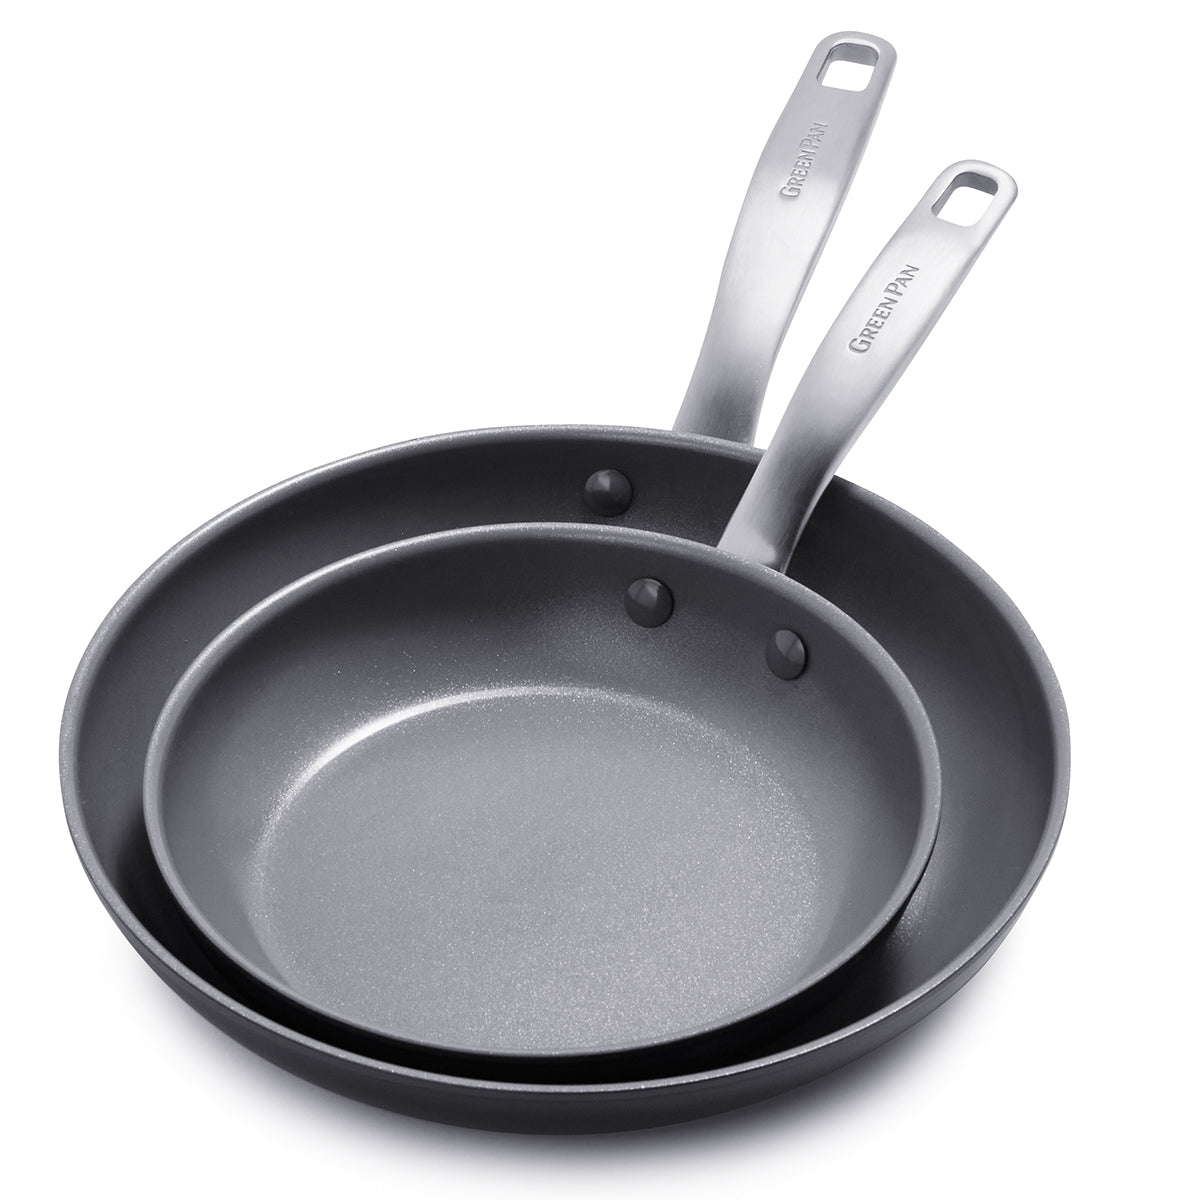 Nonstick Pans for sale in Greenville, South Carolina